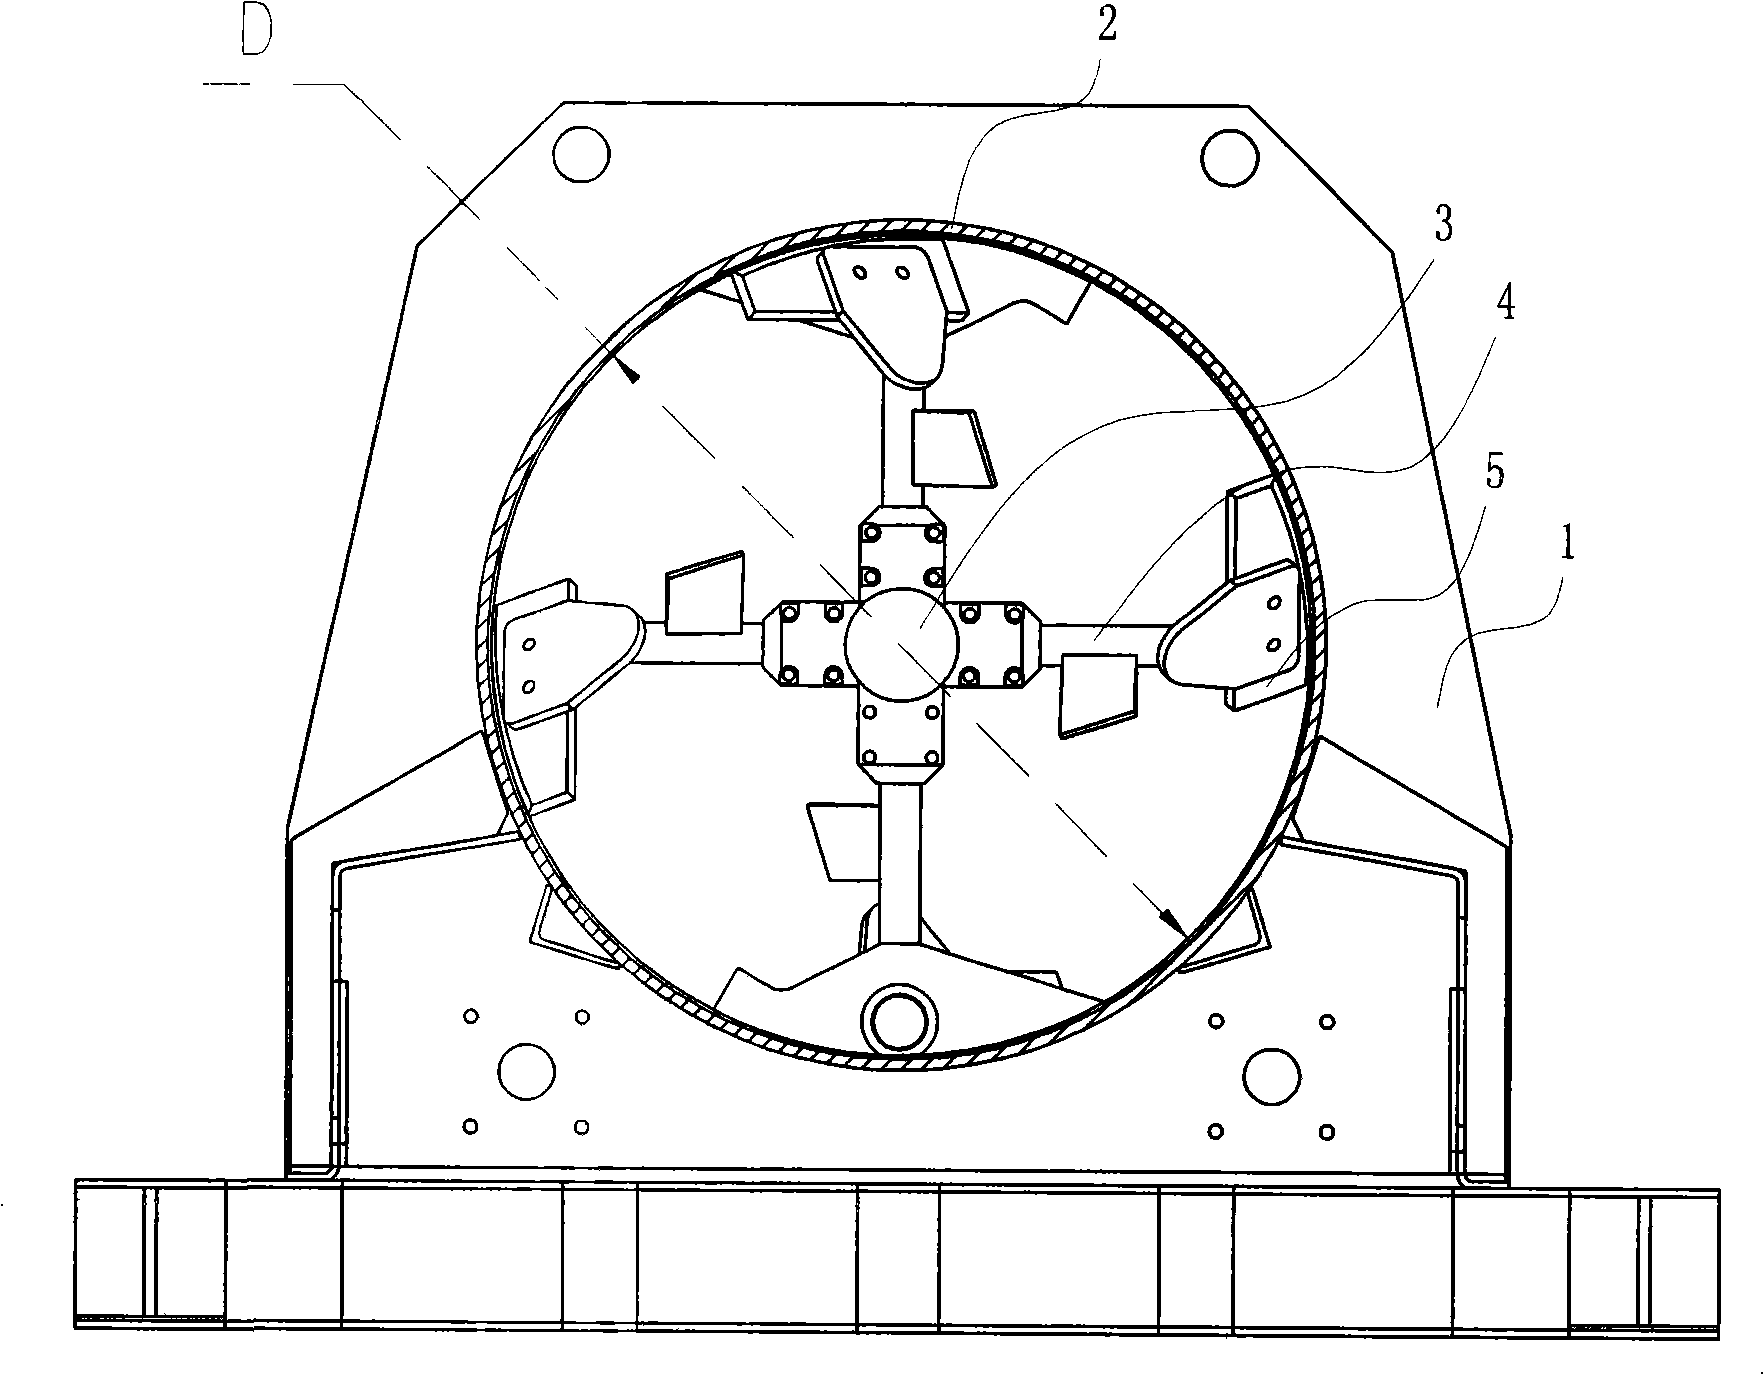 Horizontal type mixer with barrel configuration determined according to Froude number